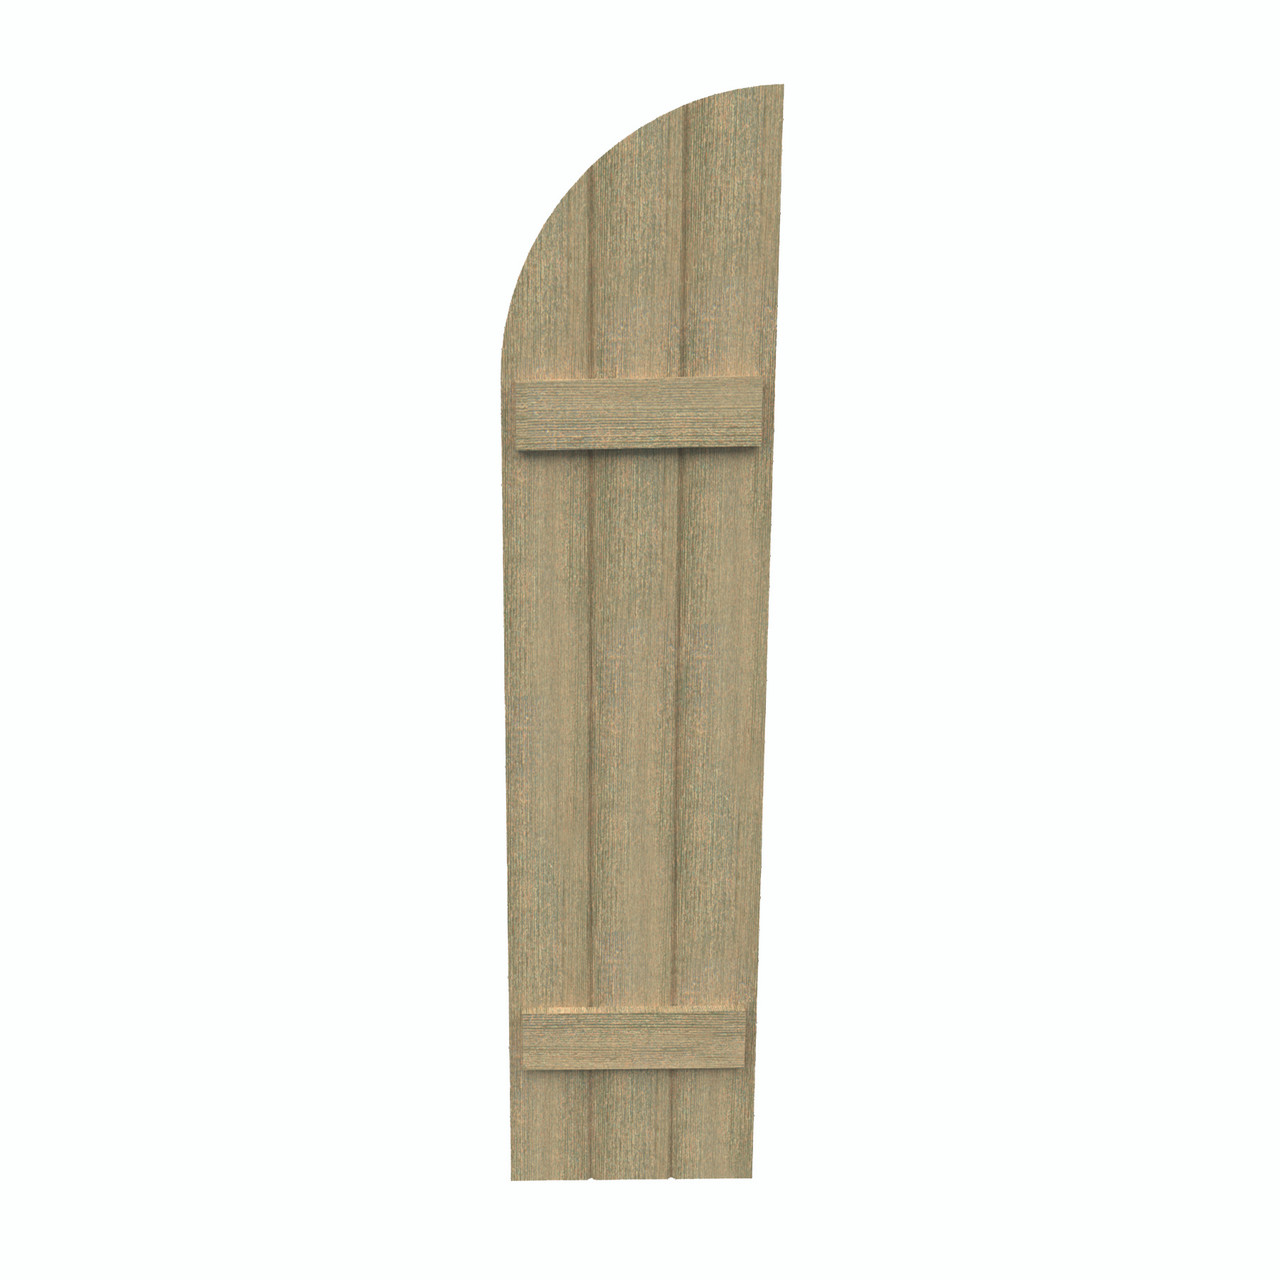 14 inch by 113 inch Quarter Round Shutter with 3-Boards